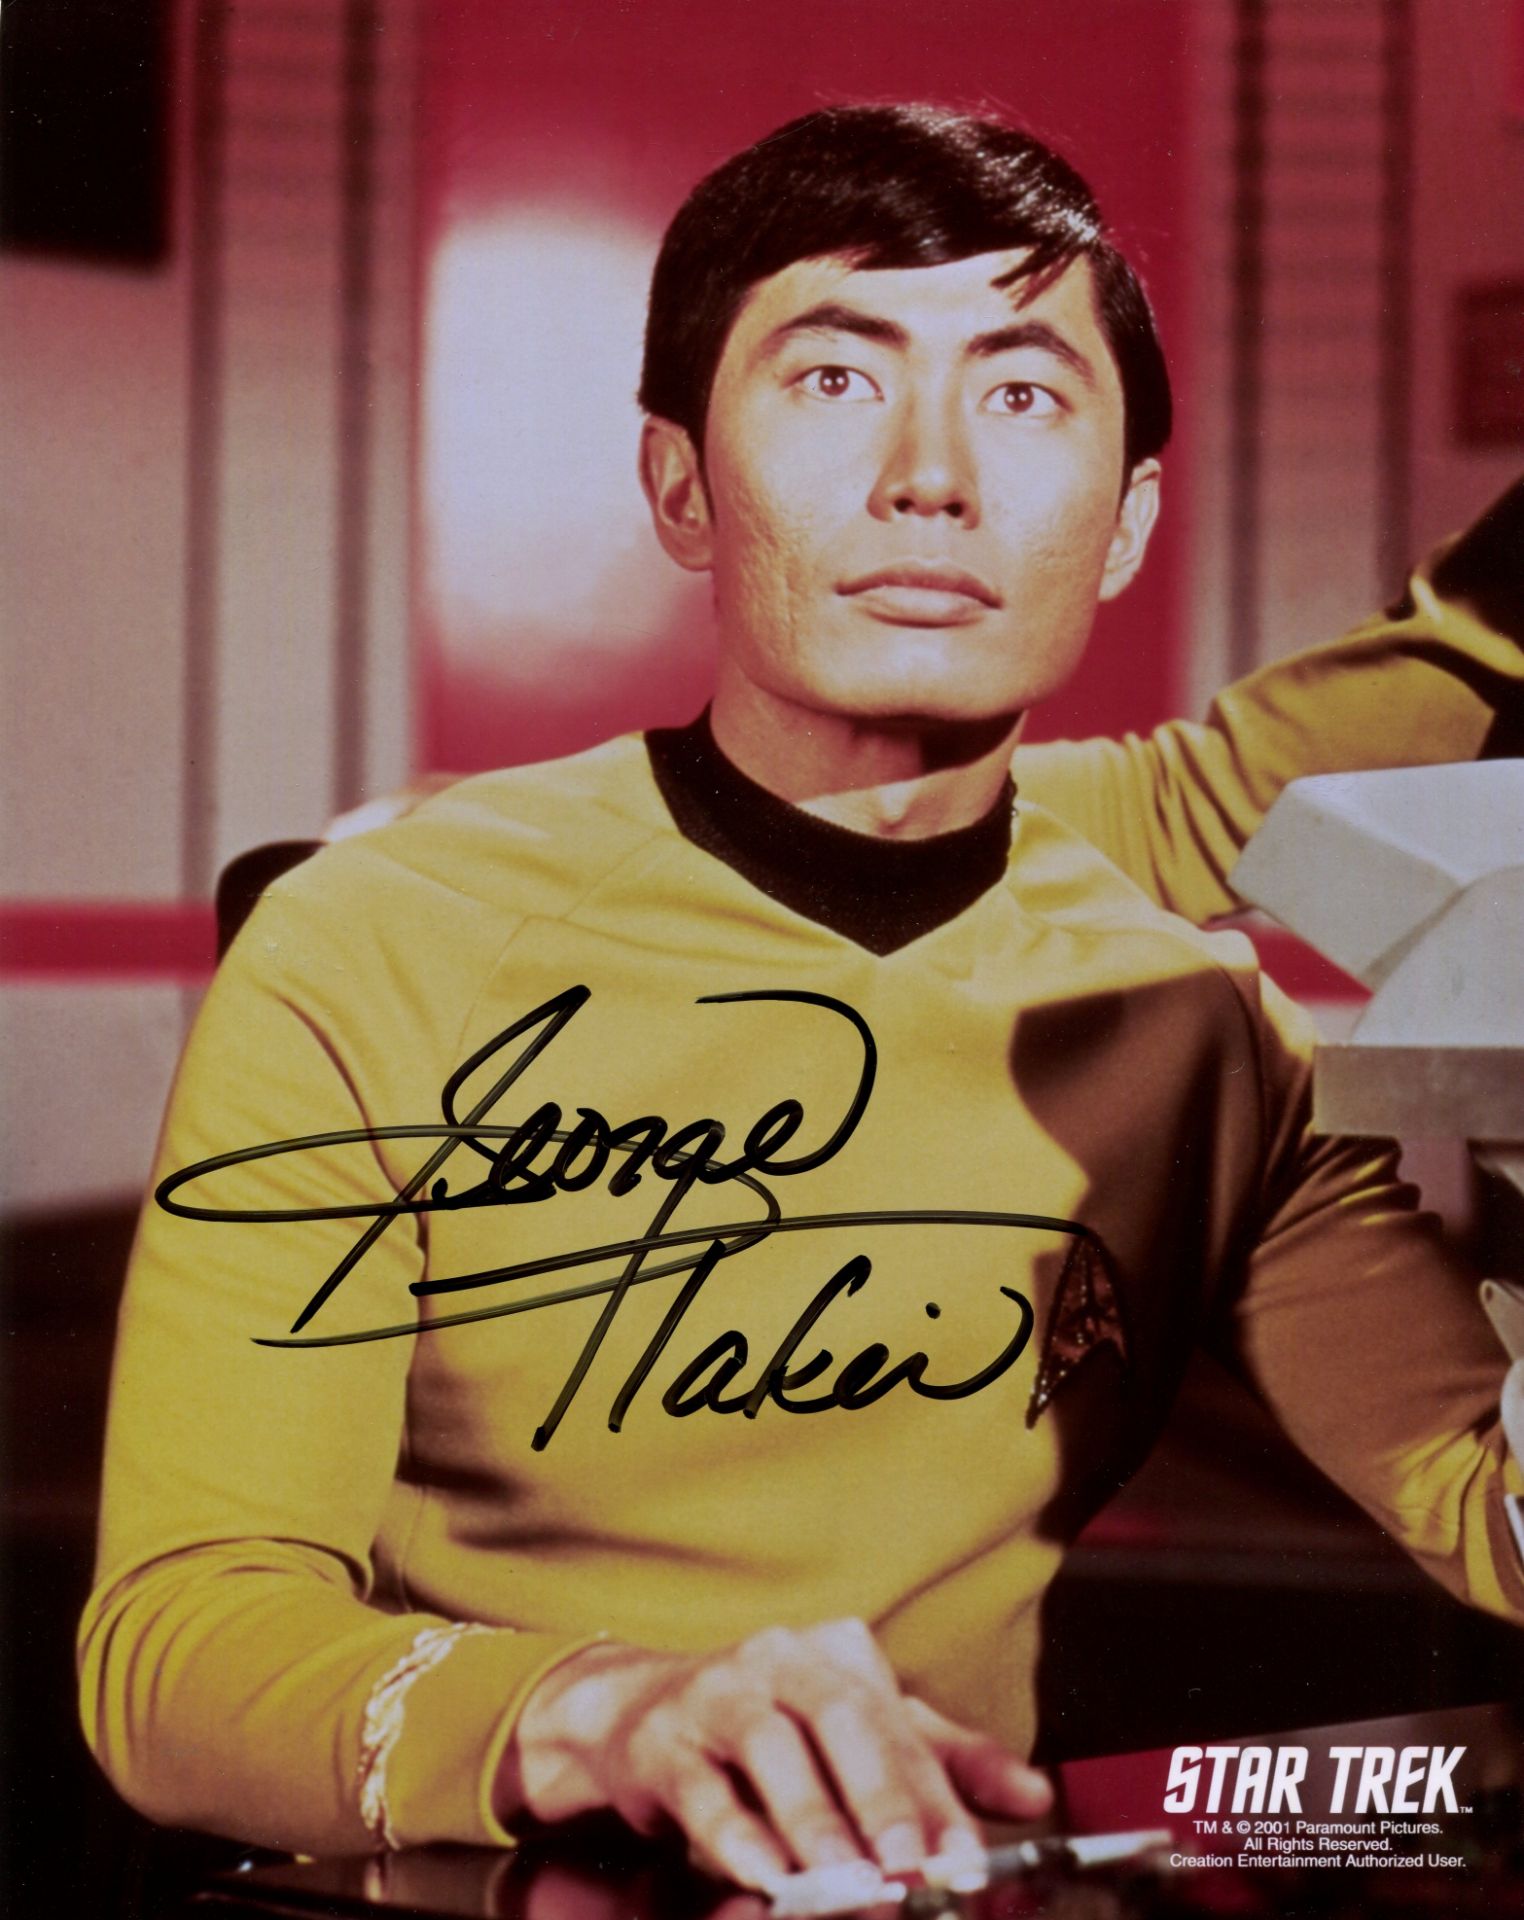 STAR TREK: A good selection of five signed colour 8 x 10 photographs by various leading cast - Image 4 of 5